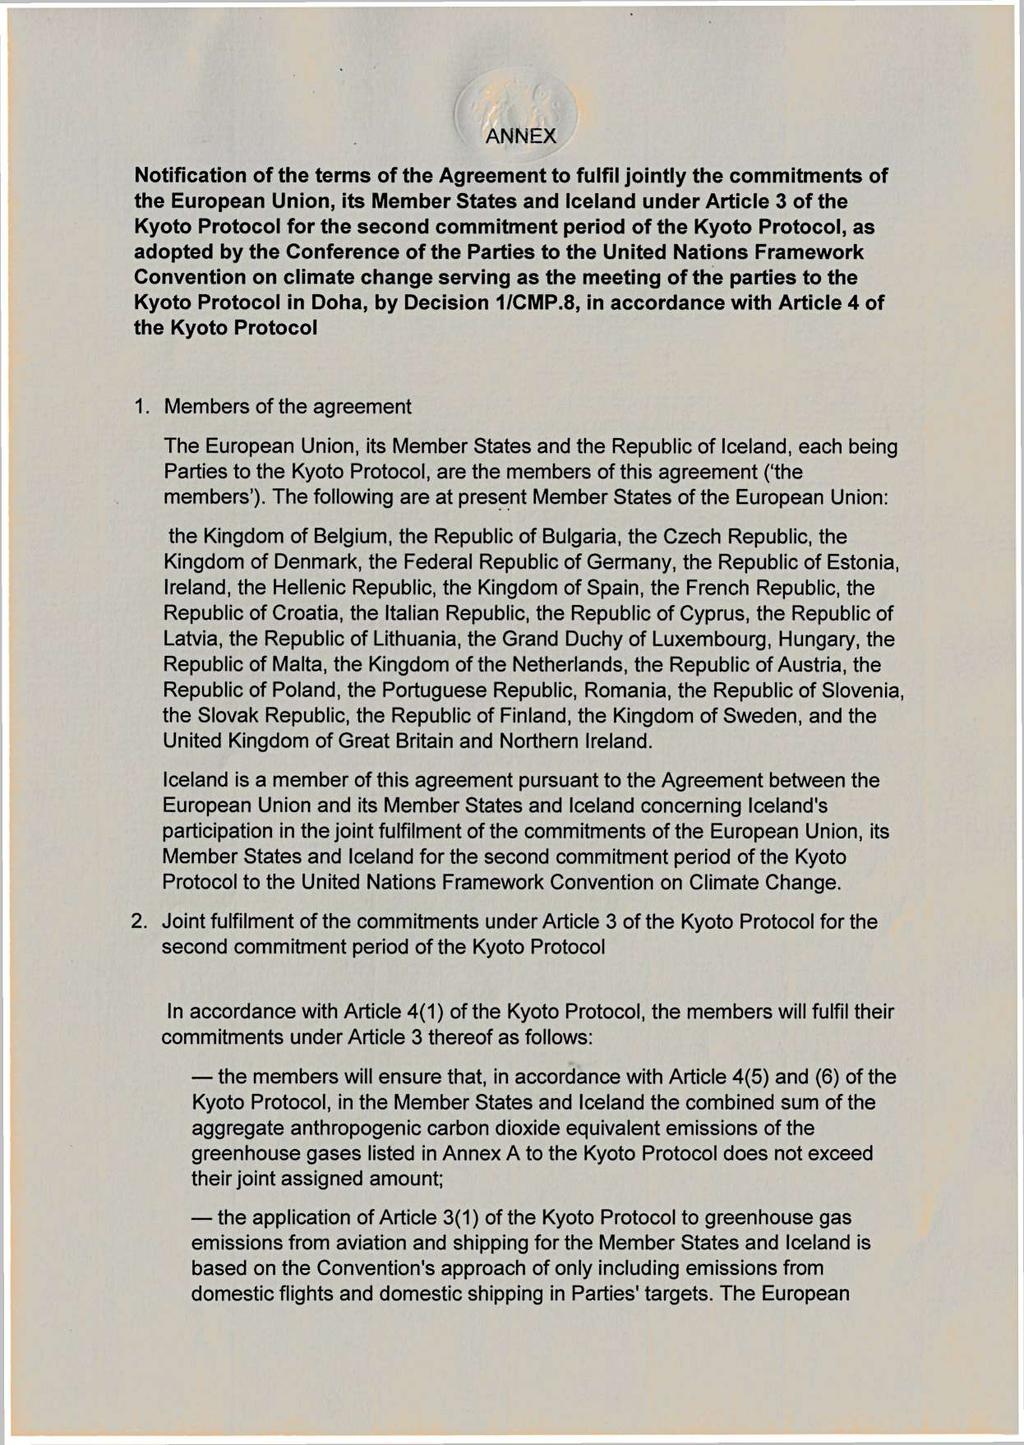 ANNEX Notification of the terms of the Agreement to fulfil jointly the commitments of the European Union, its Member States and Iceland under Article 3 of the Kyoto Protocol for the second commitment